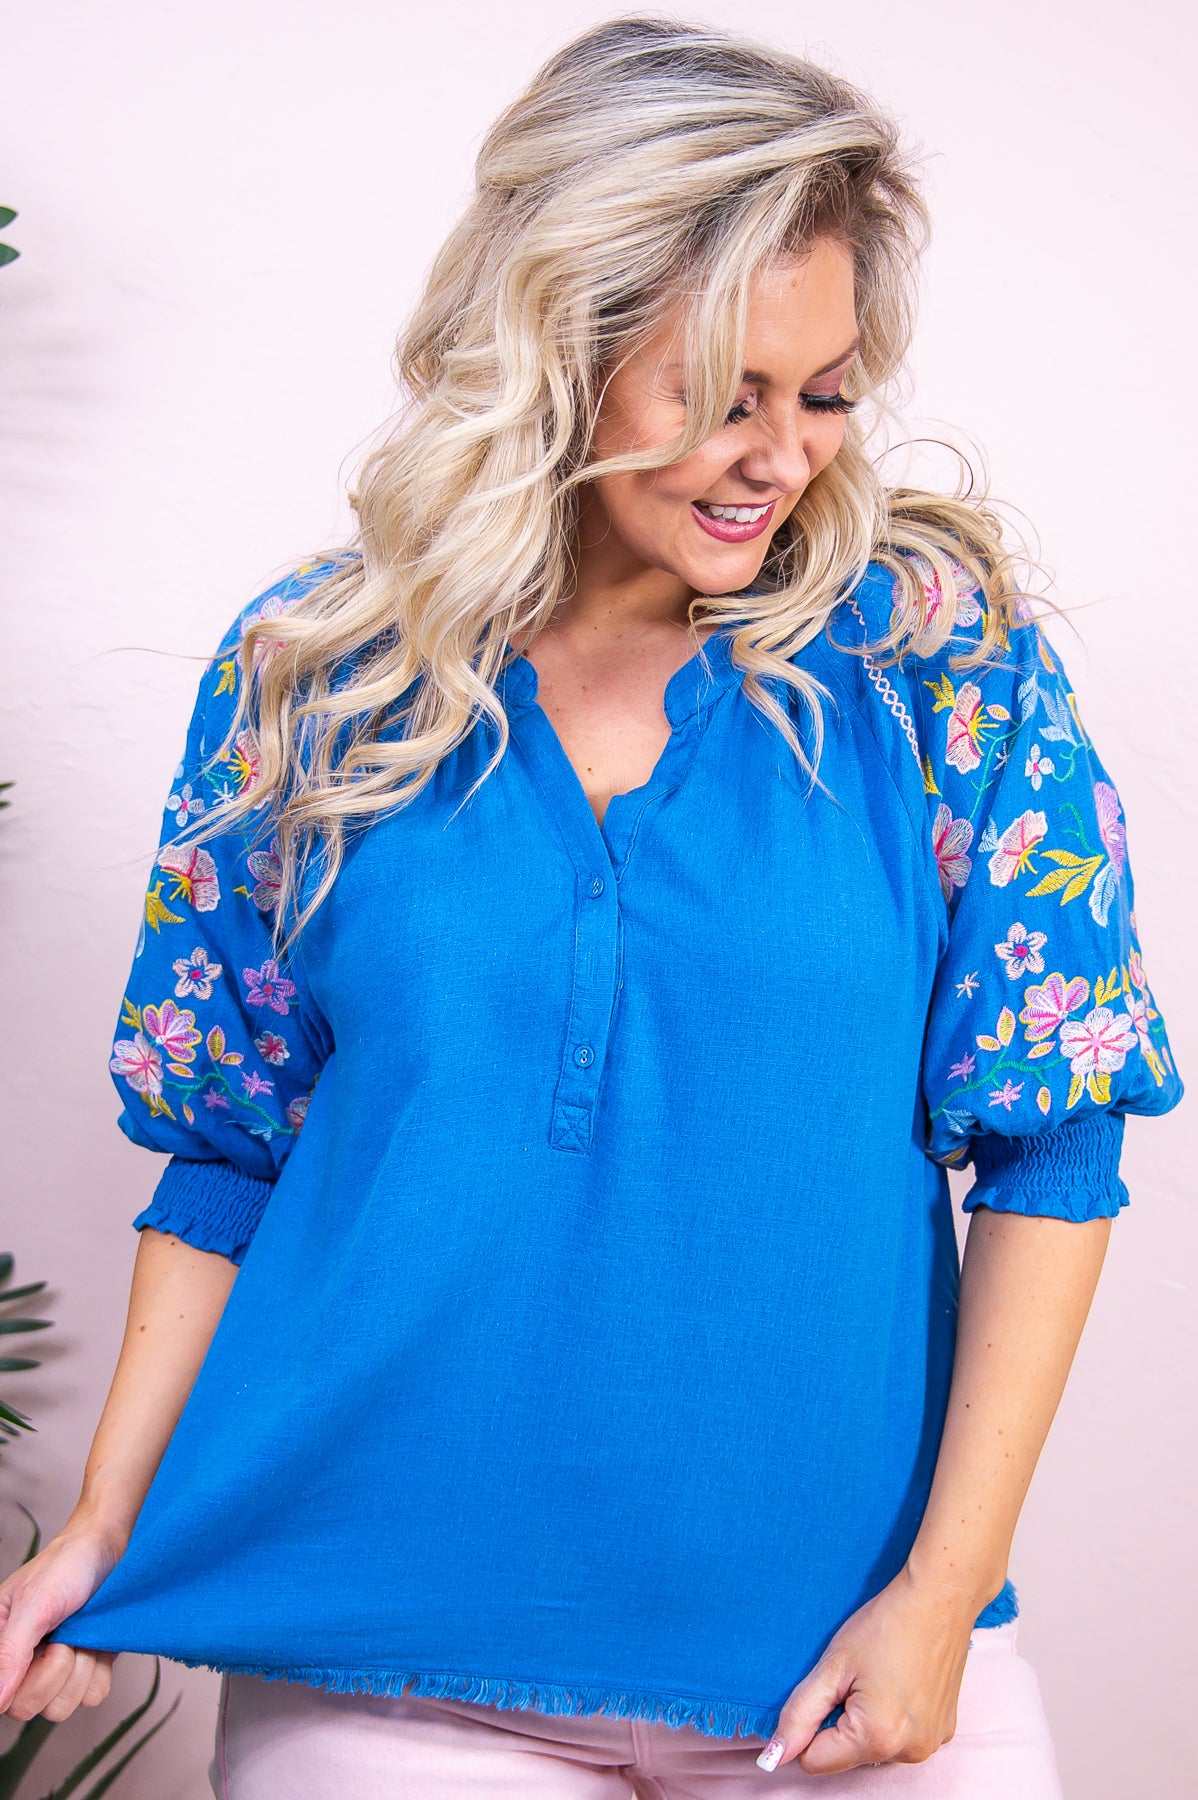 Style Traditions Blue/Multi Color Floral Embroidered Top - T8988BL